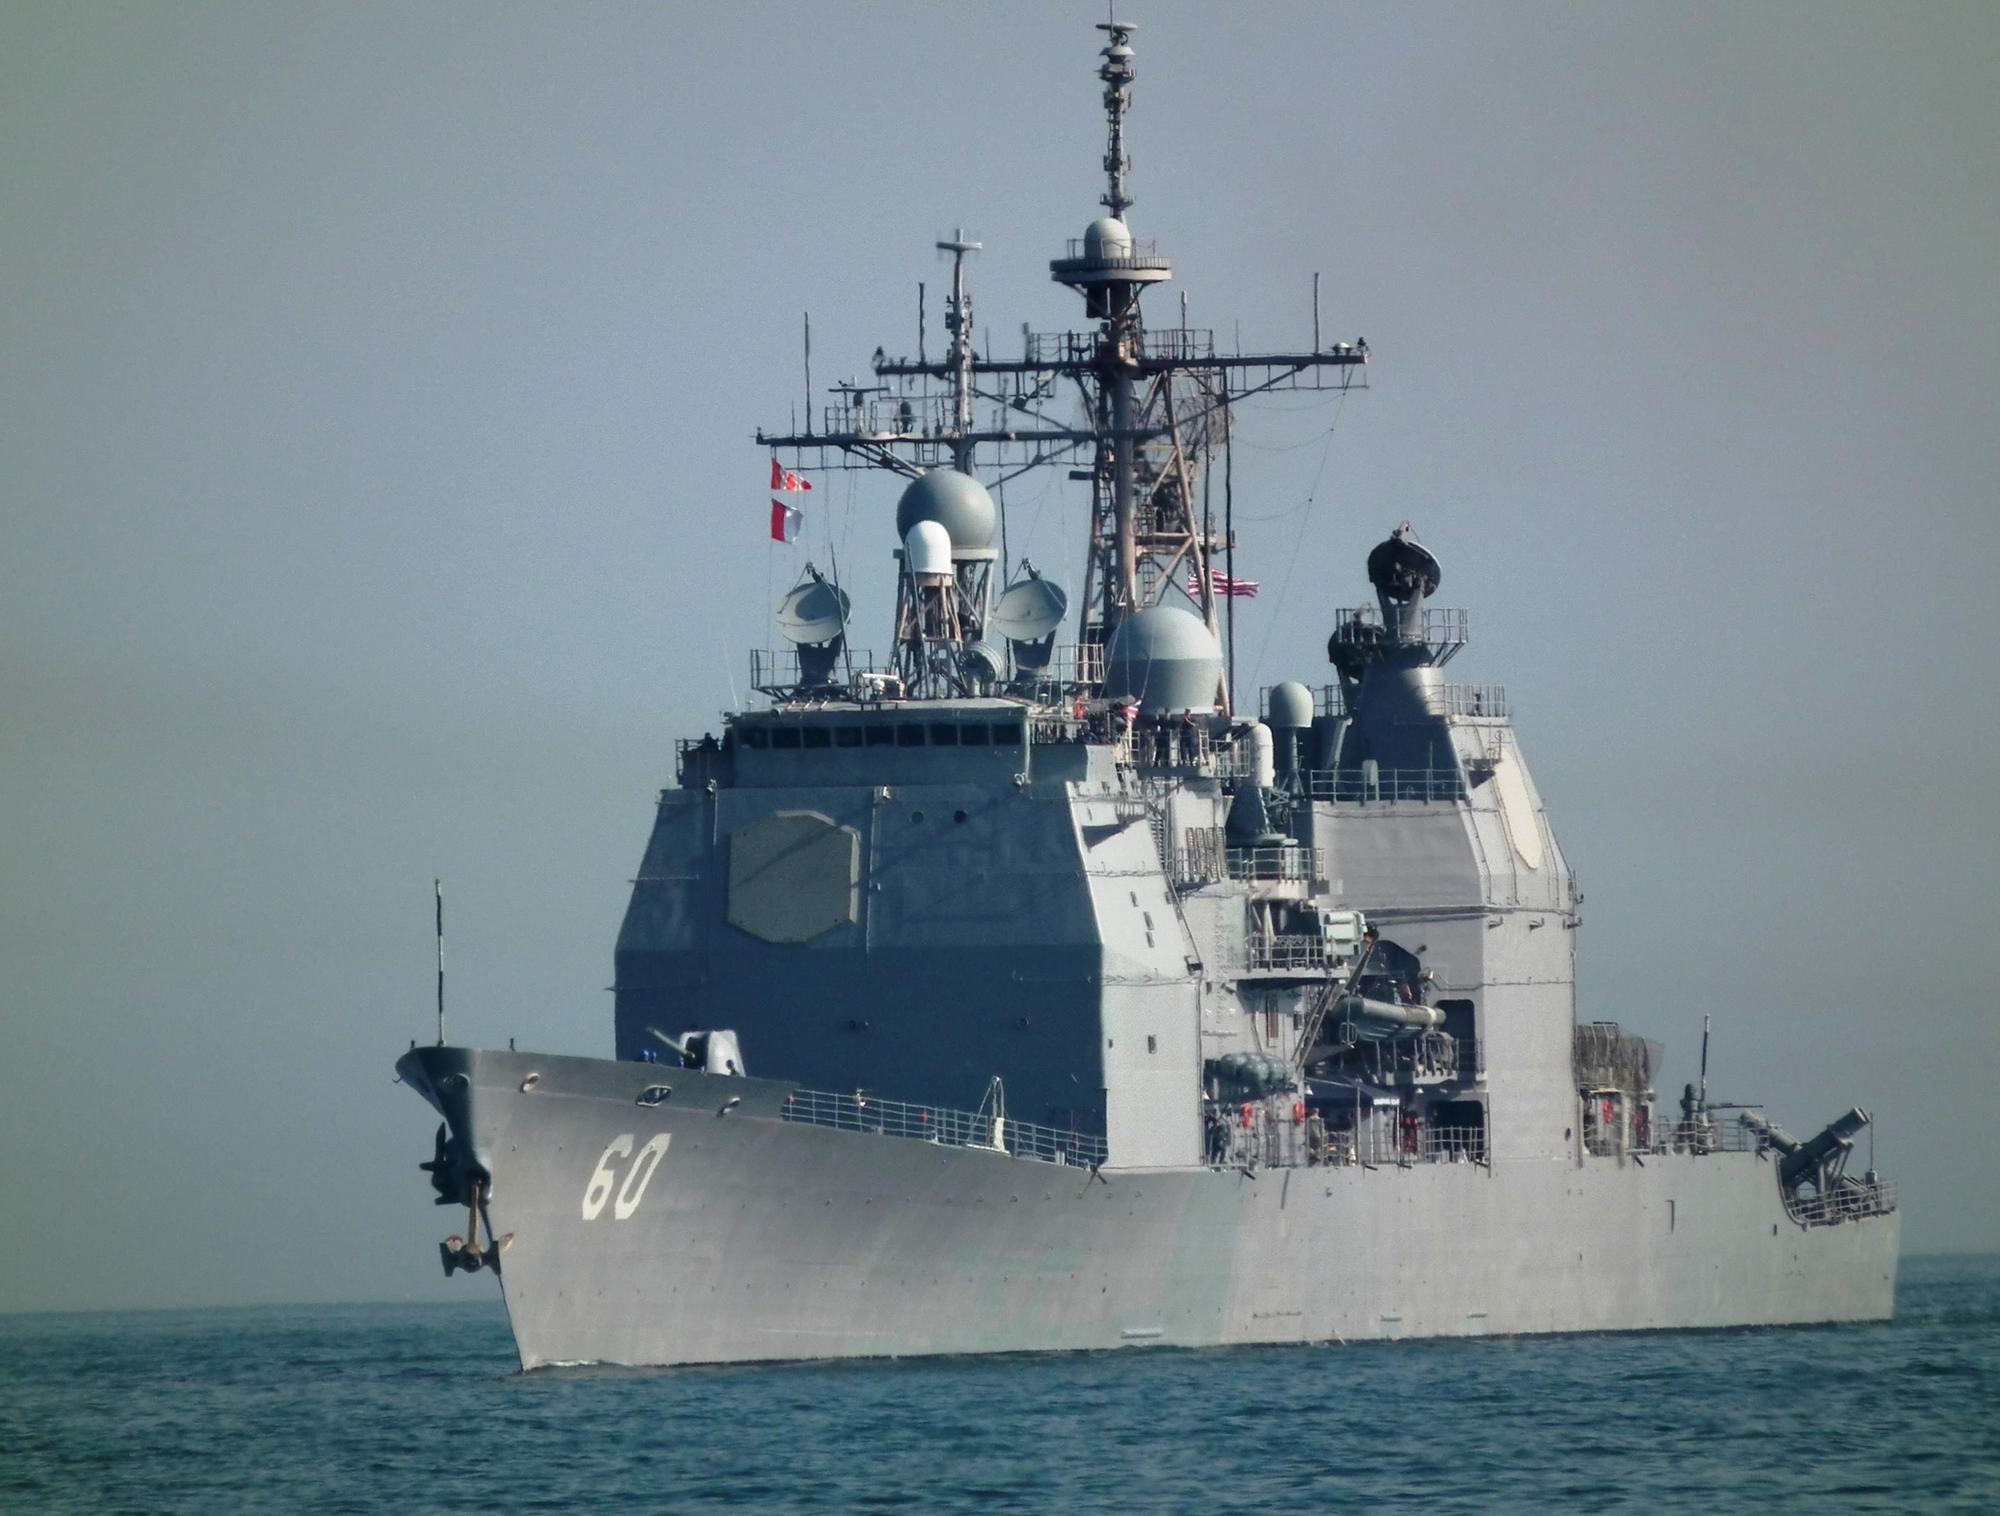 USS Normandy Portsmouth May 27 2012 - 1.jpg